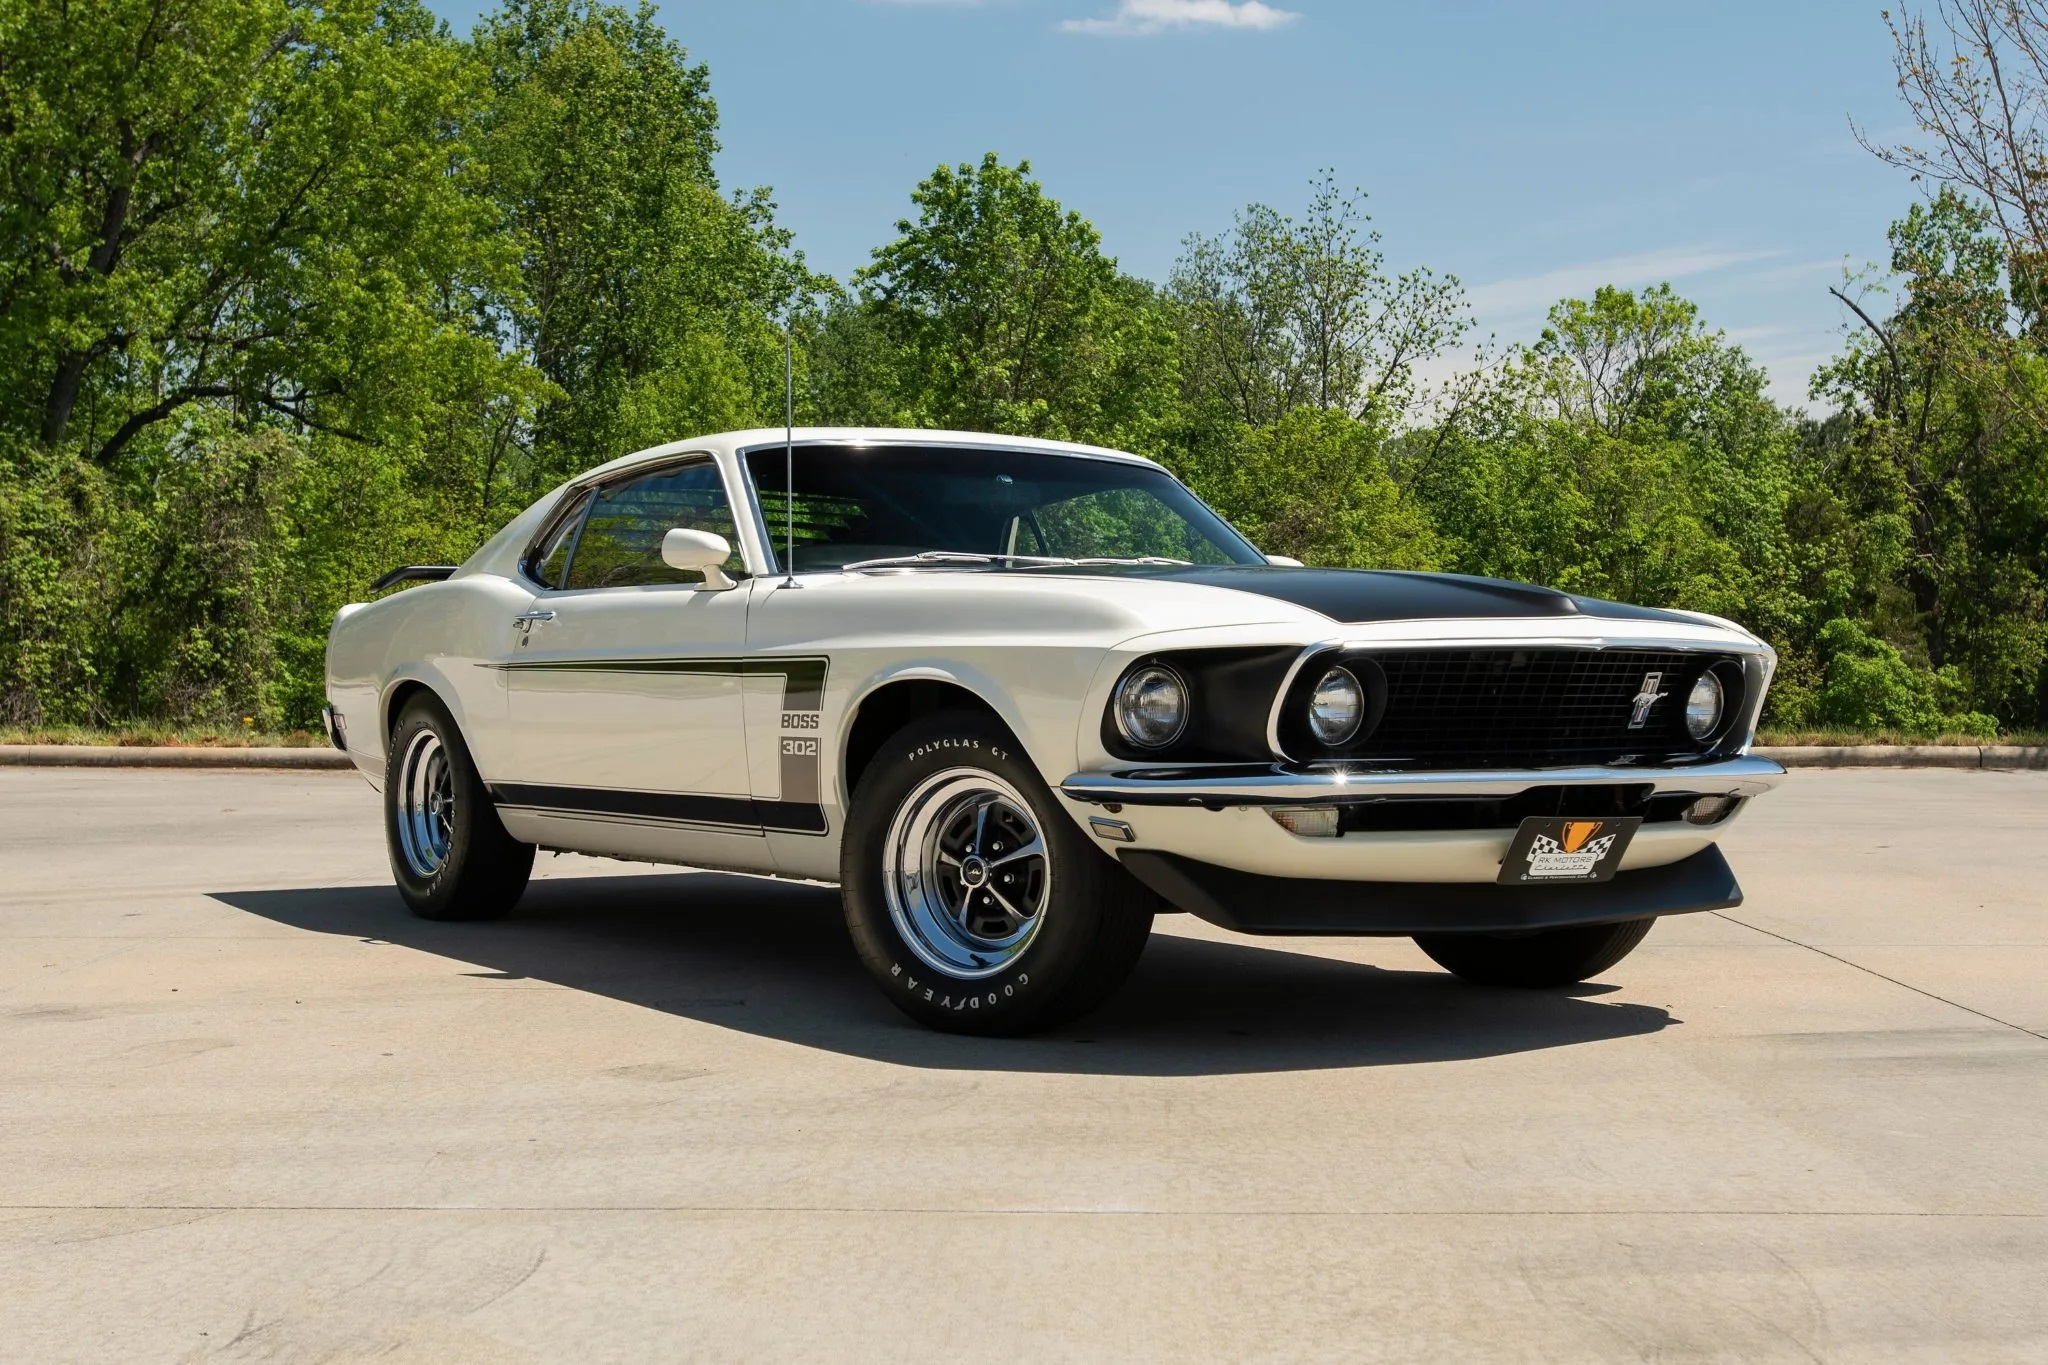 Mustang Of The Day: 1969 Ford Mustang Boss 302